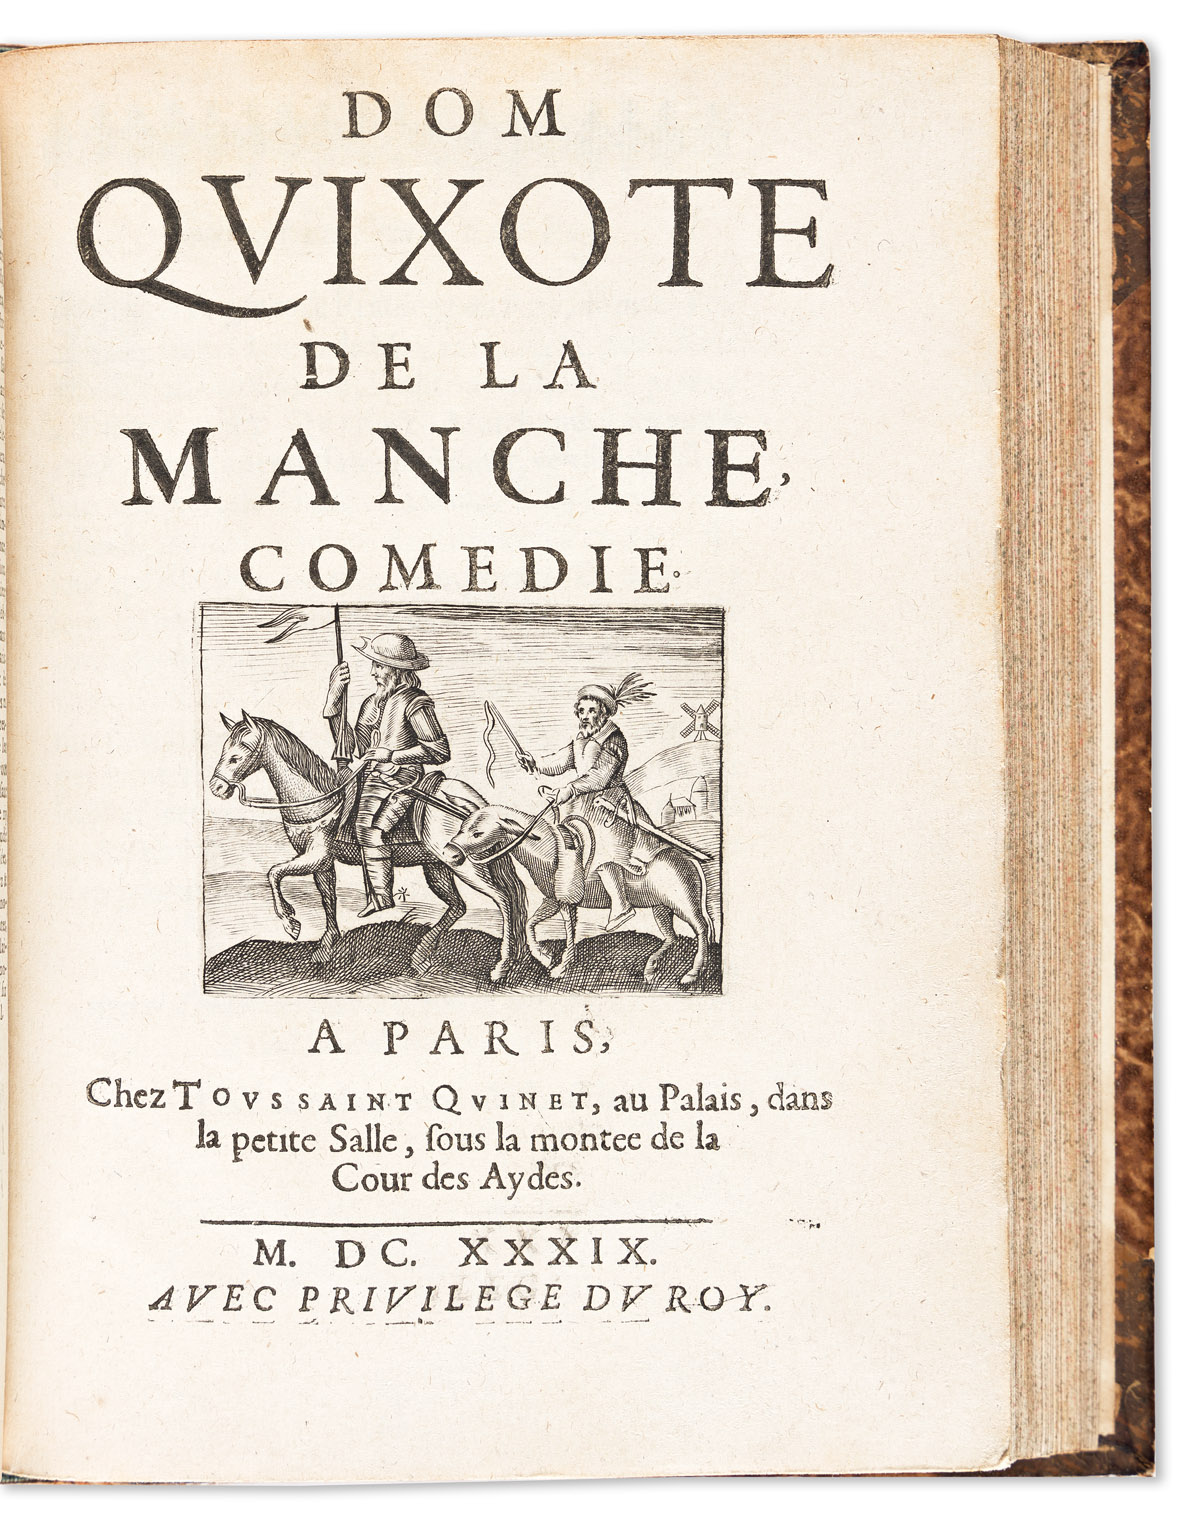 Sammelband of Five Century French Comedies, 1638-1642. Including a Work Inspired by Cervantes.